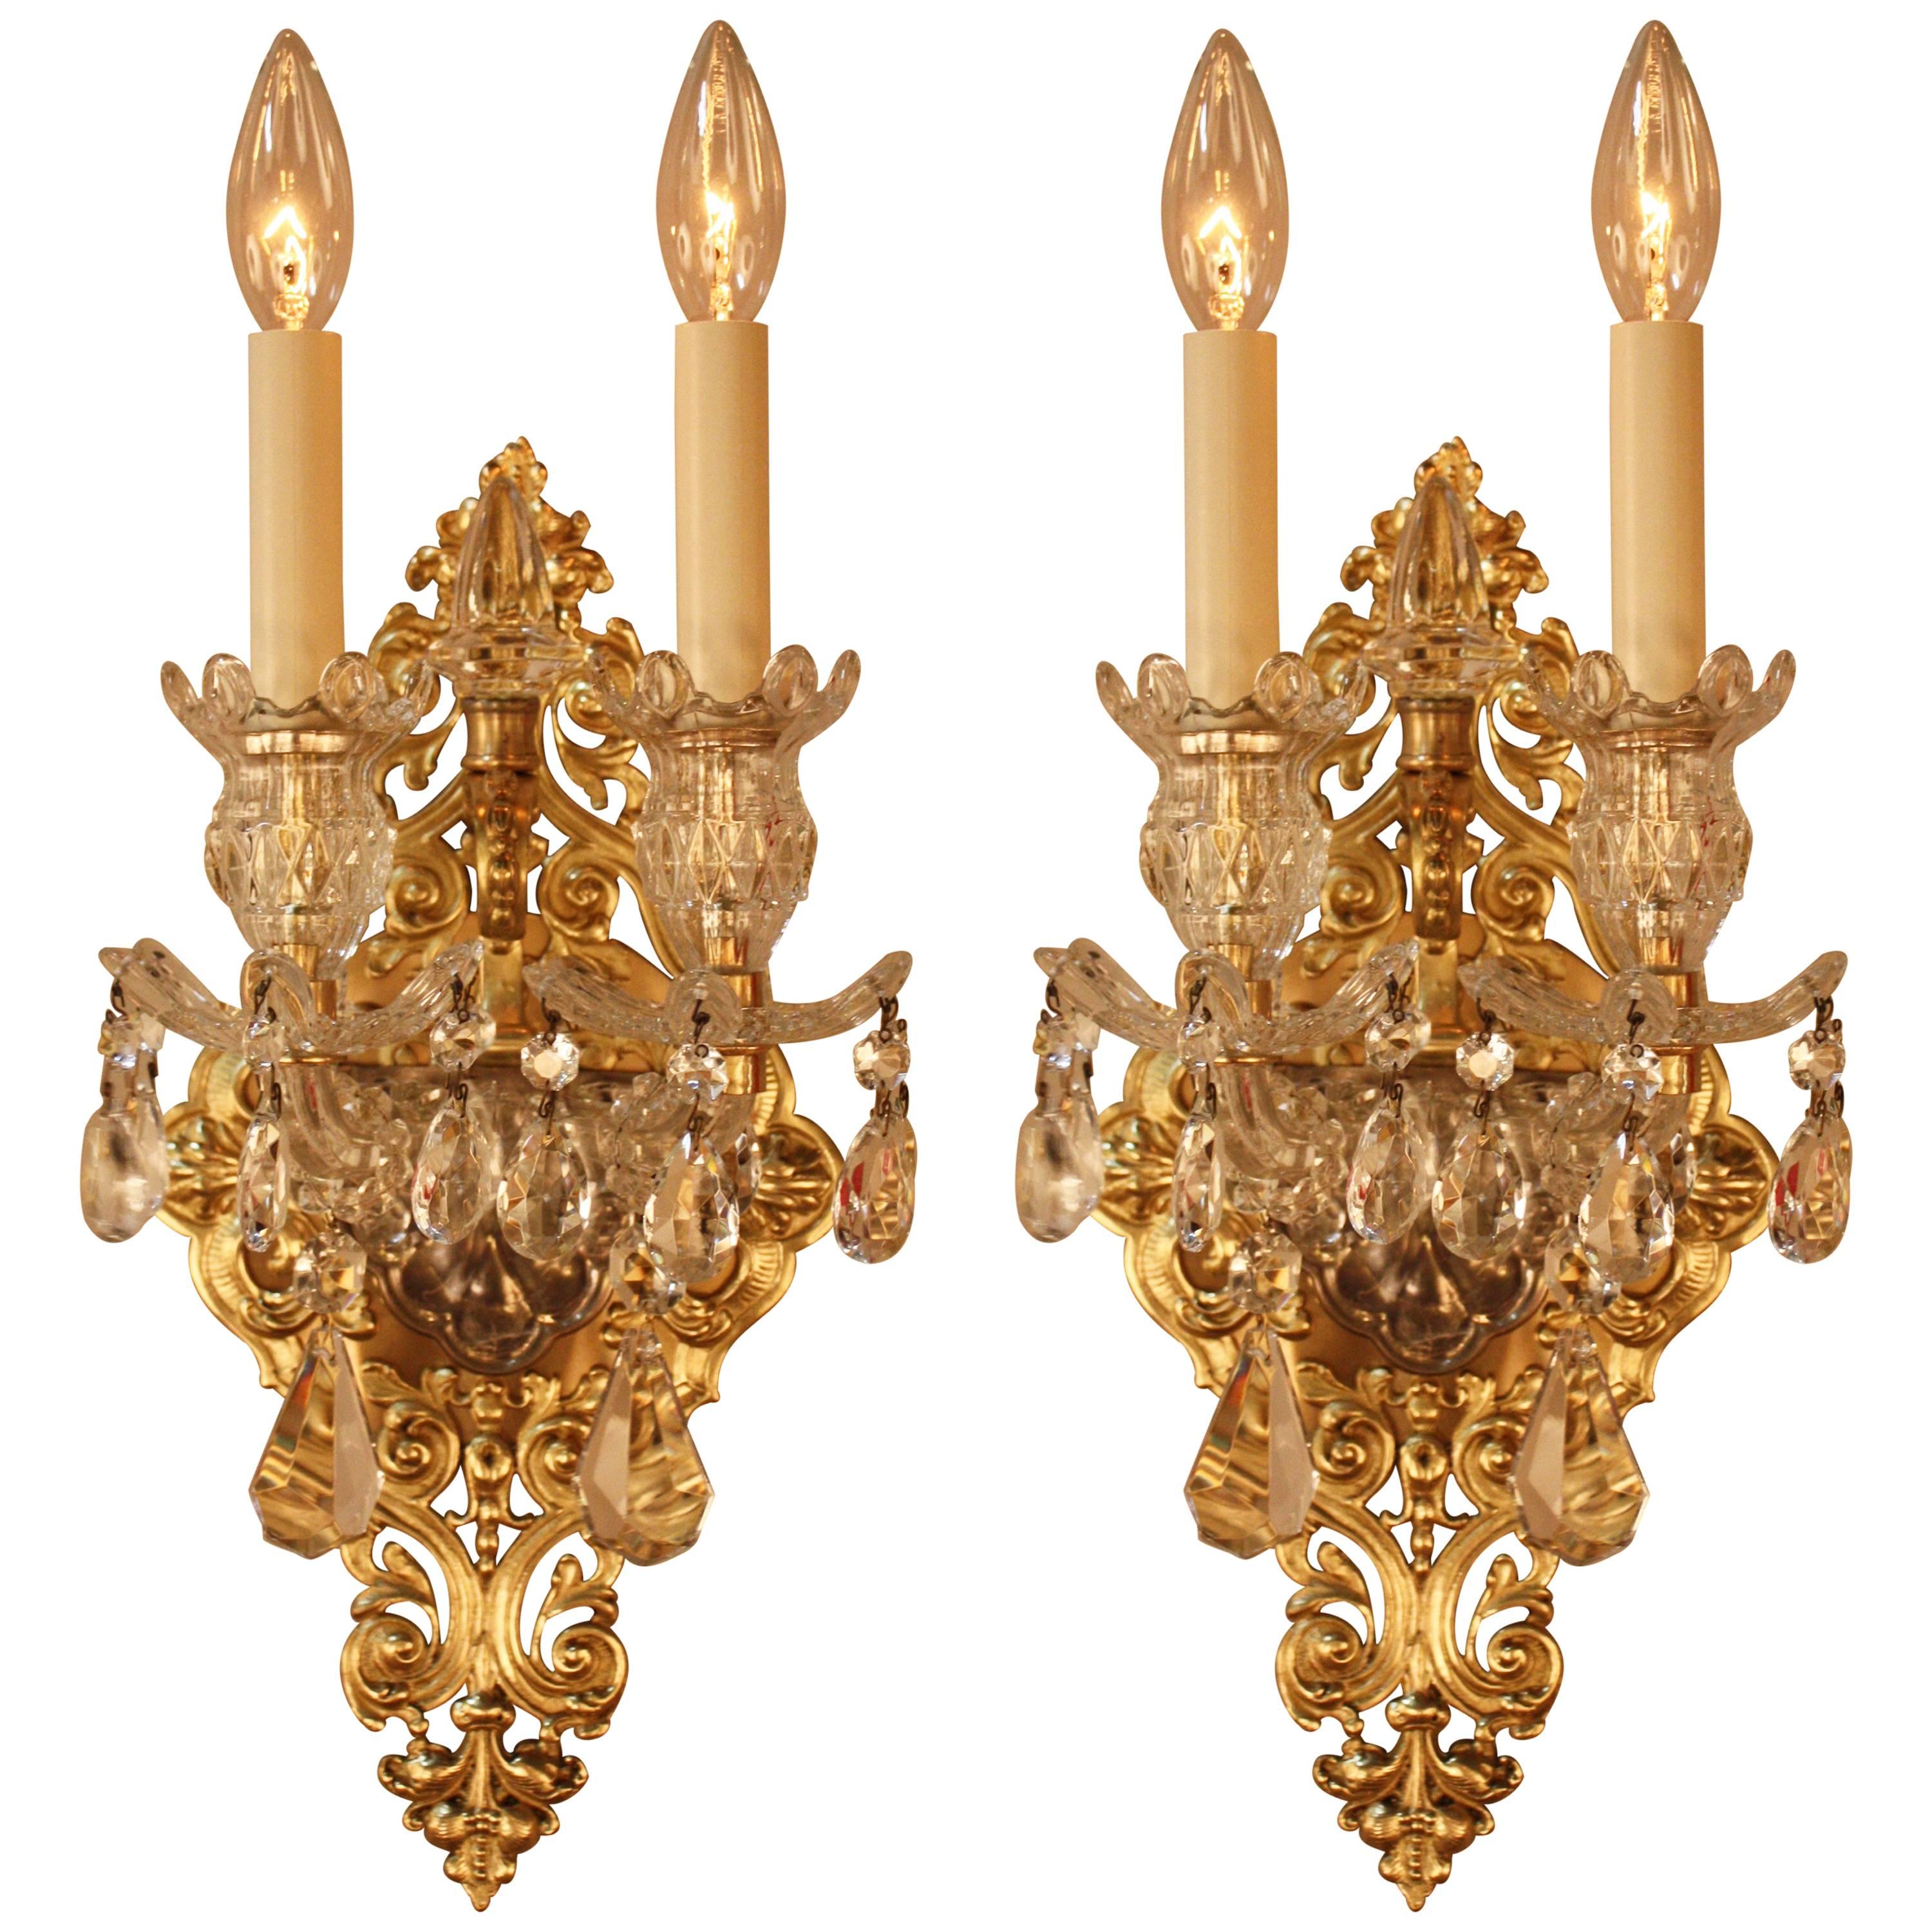 Fabulous Pair of Spanish Crystal and Bronze Wall Sconces